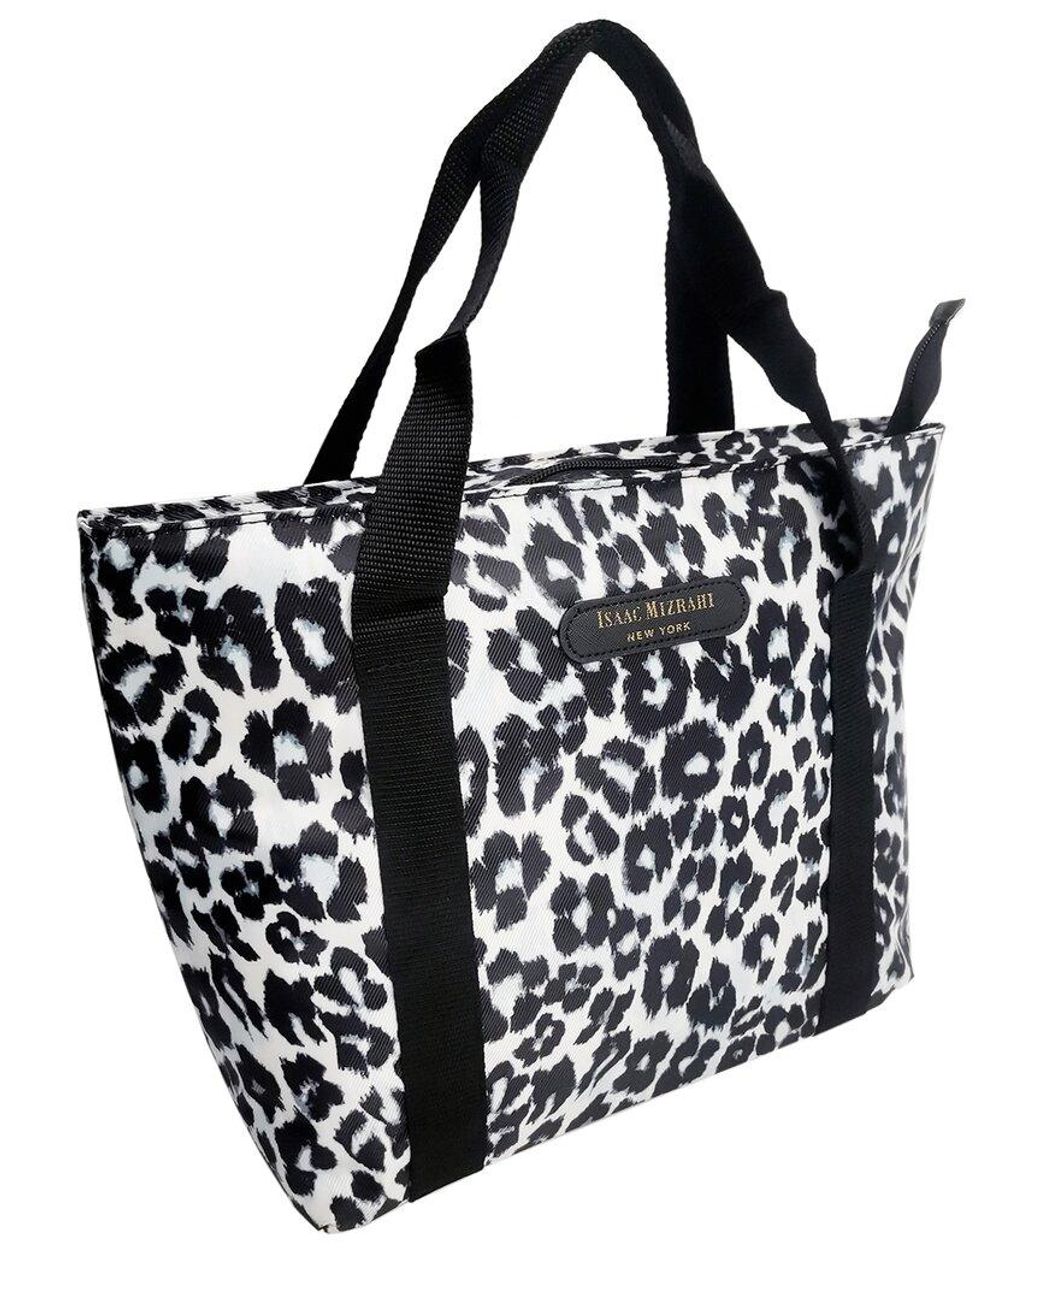 Isaac Mizrahi New York Griggs Large Lunch Tote in Black | Lyst